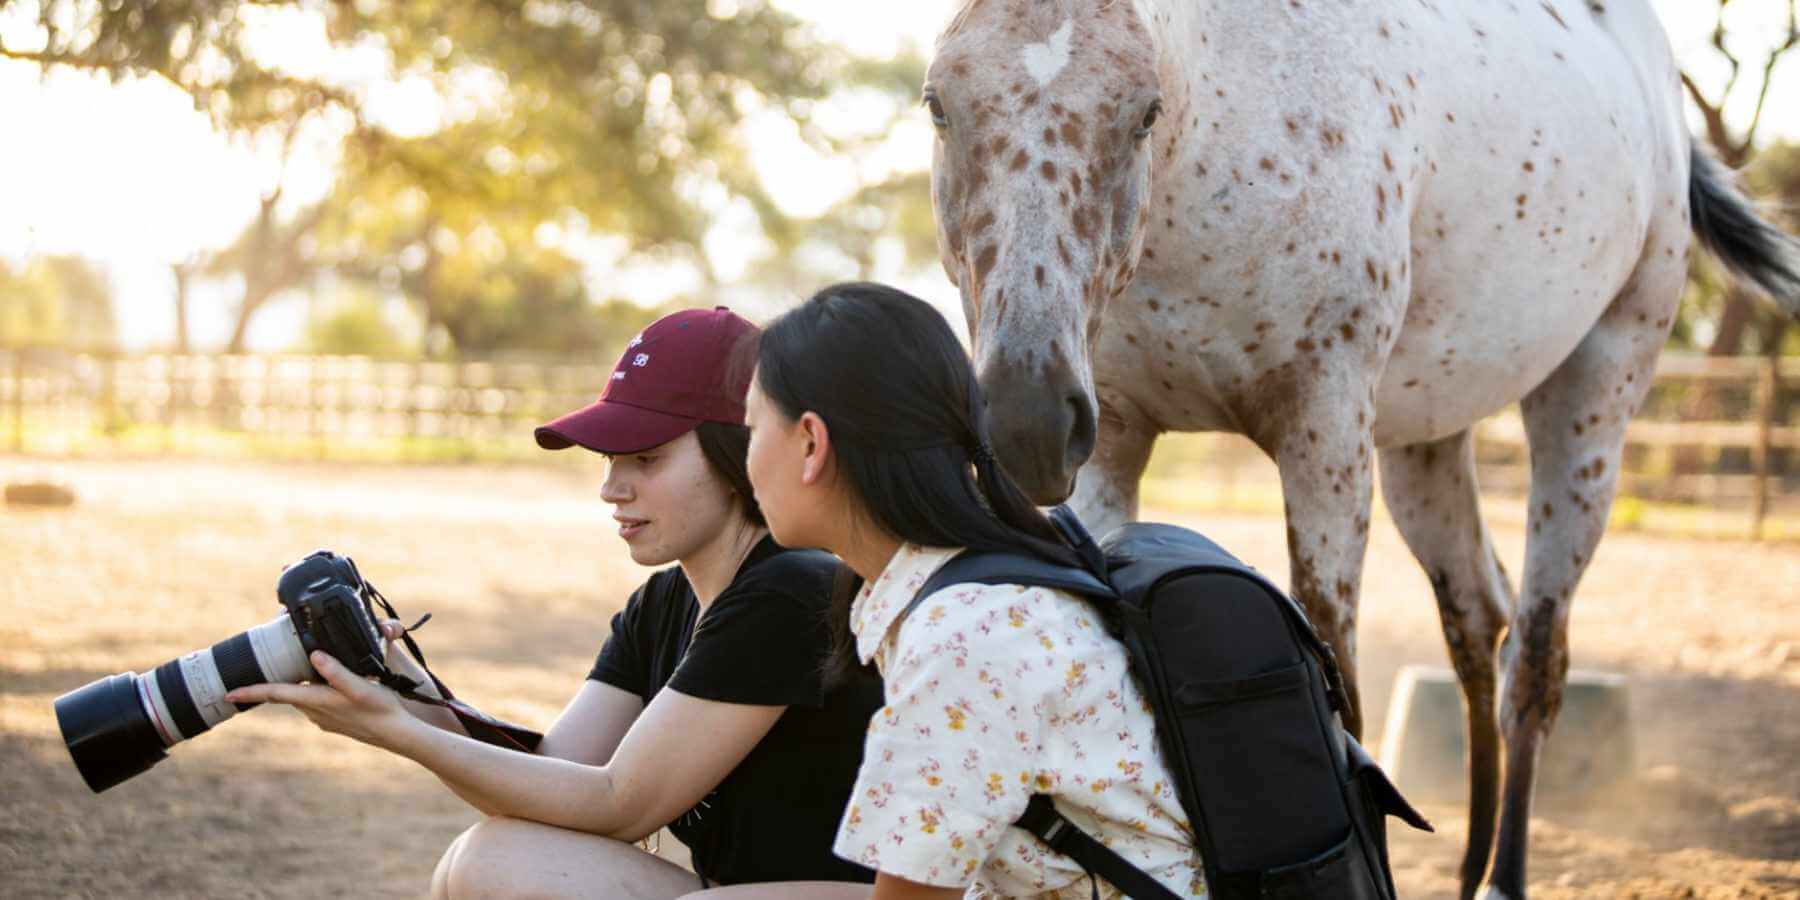 Two young photography enthusiasts review their recent photos within the Joseph's Dream Stud paddocks.